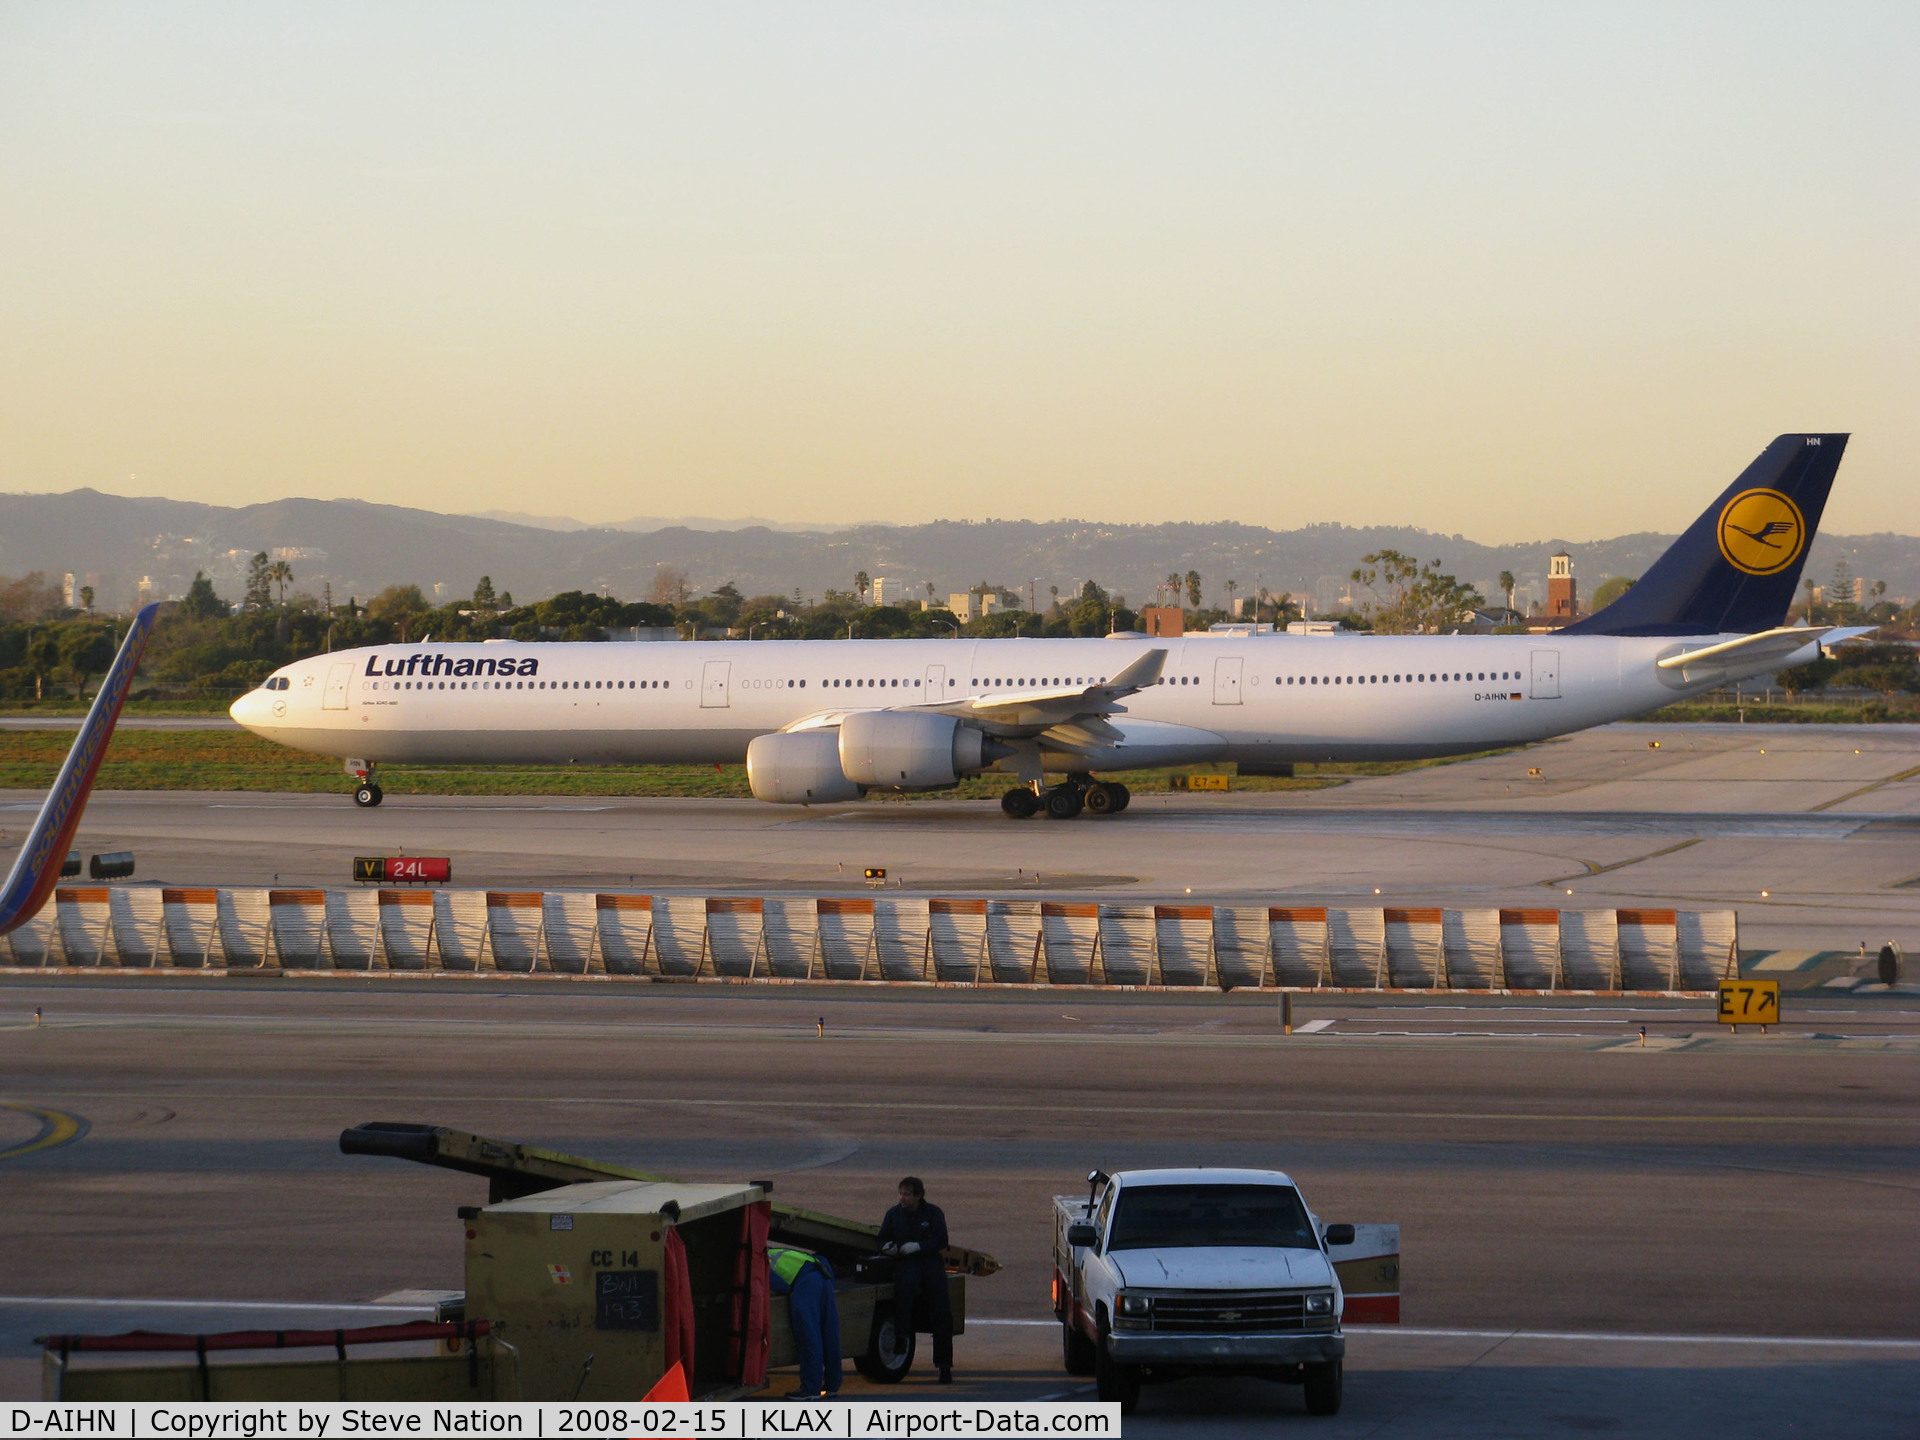 D-AIHN, 2006 Airbus A340-642 C/N 763, Lufthansa 2006 Airbus 340-642 lined up for takeoff @ Los Angeles International Airport, CA